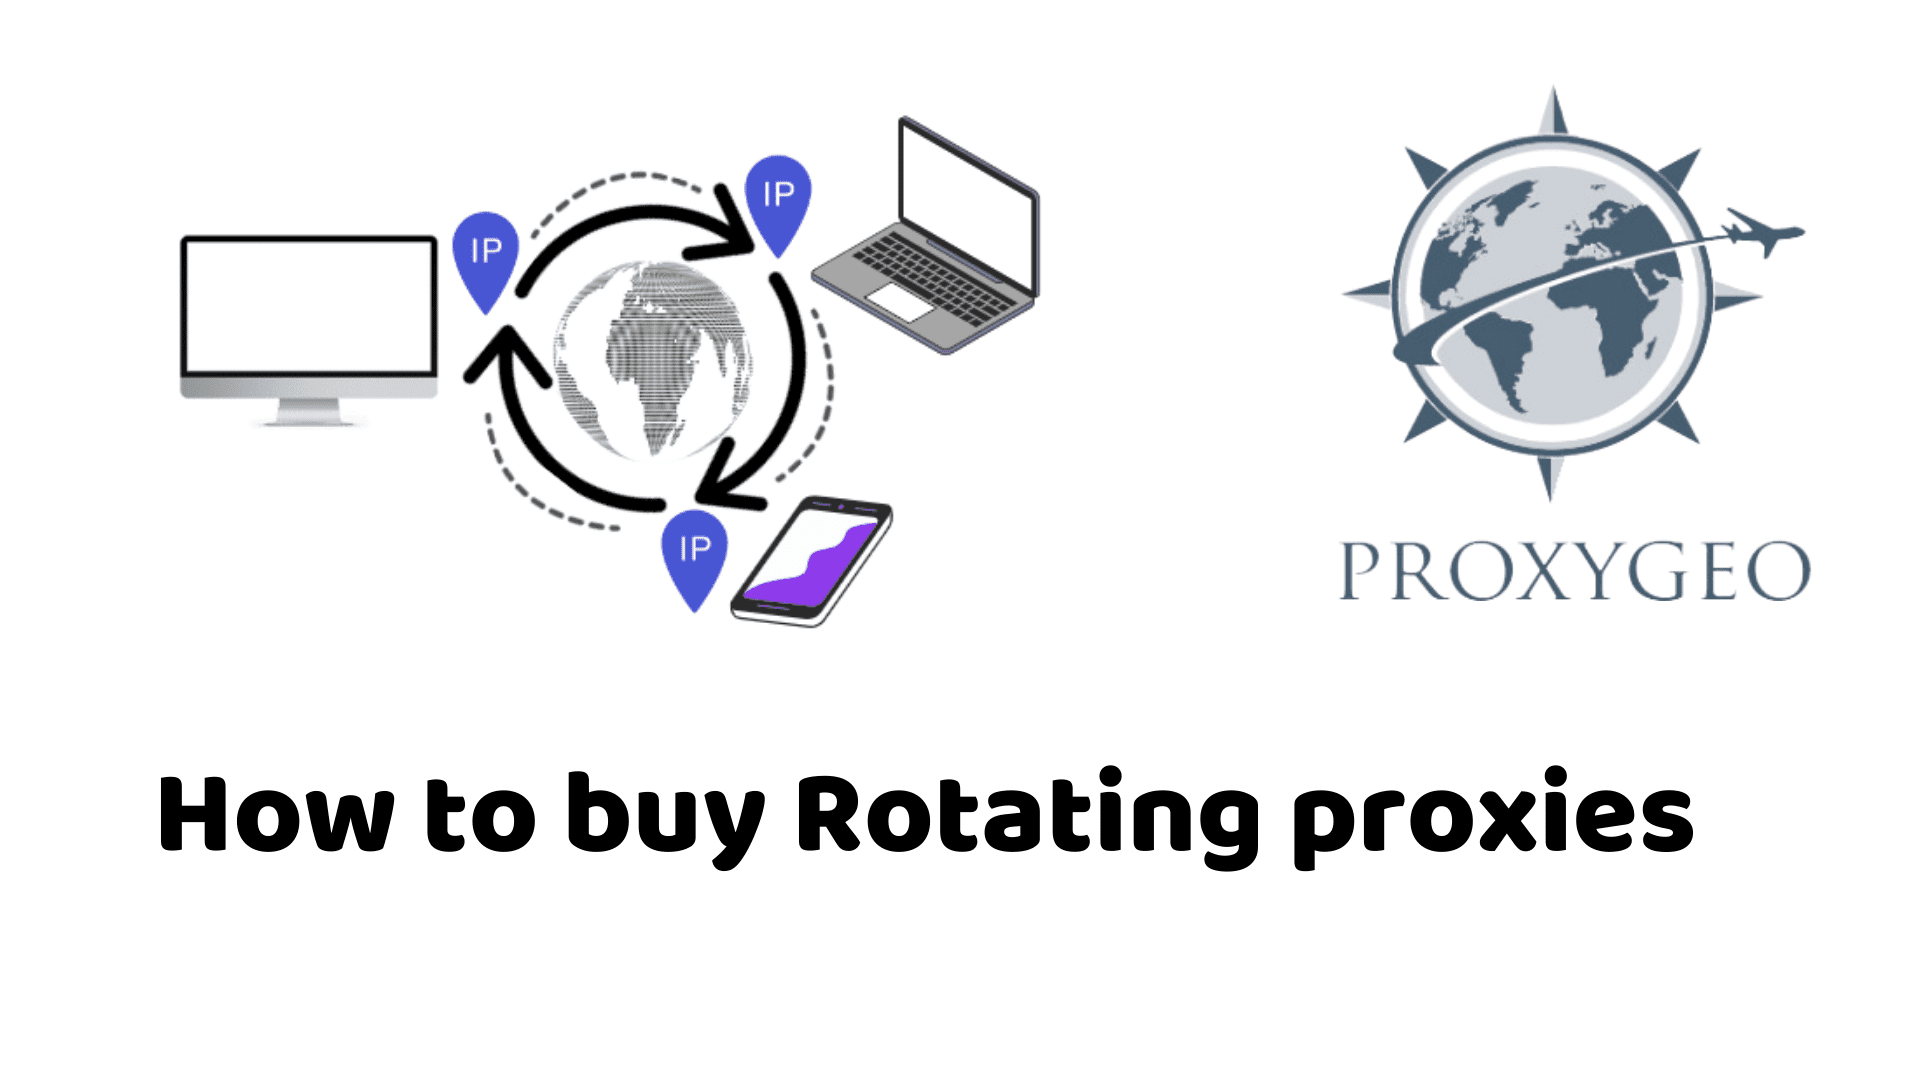 HOW TO BUY ROTATING PROXIES